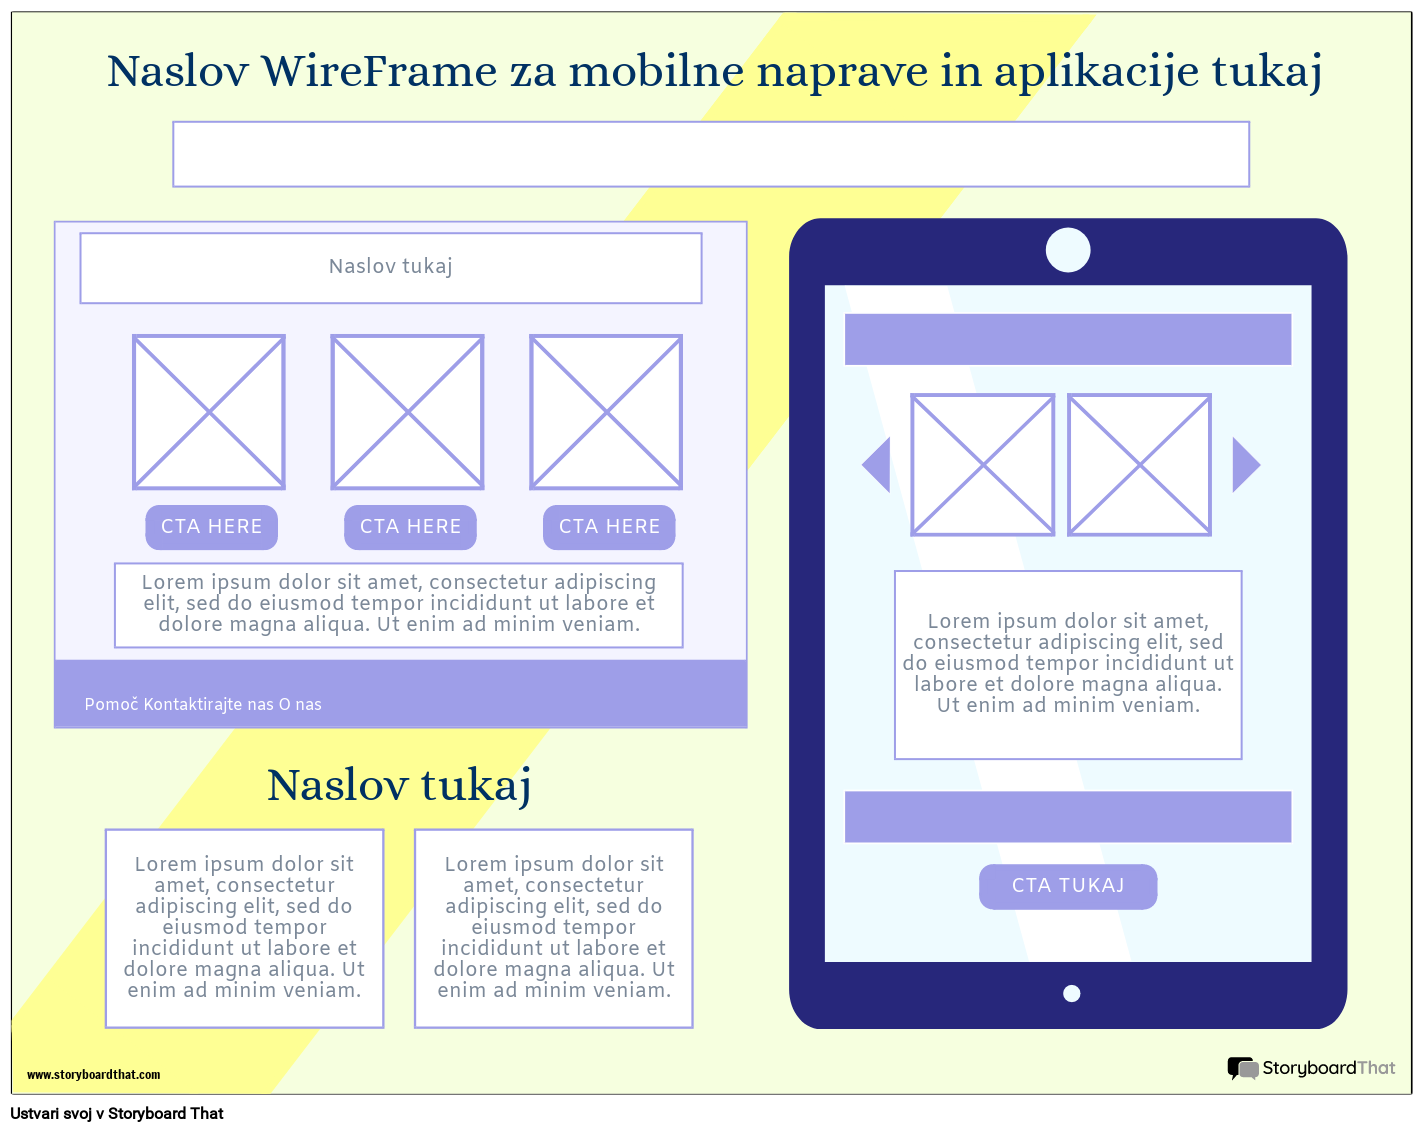 Corporate Tablet WireFrame Template 2